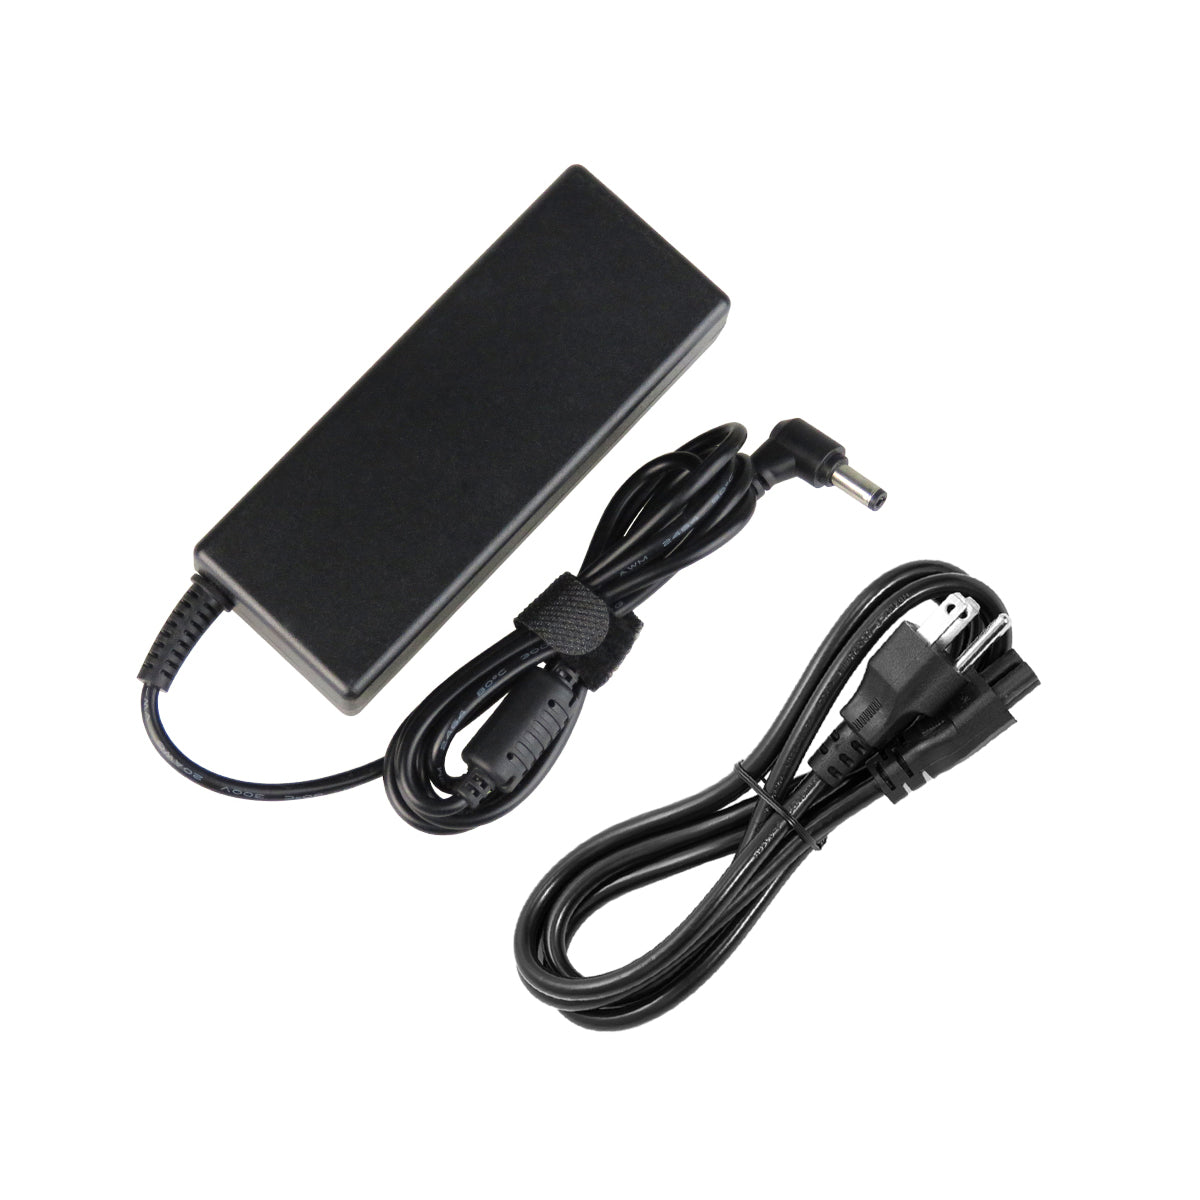 AC Adapter Charger for ASUS A45 Notebook.